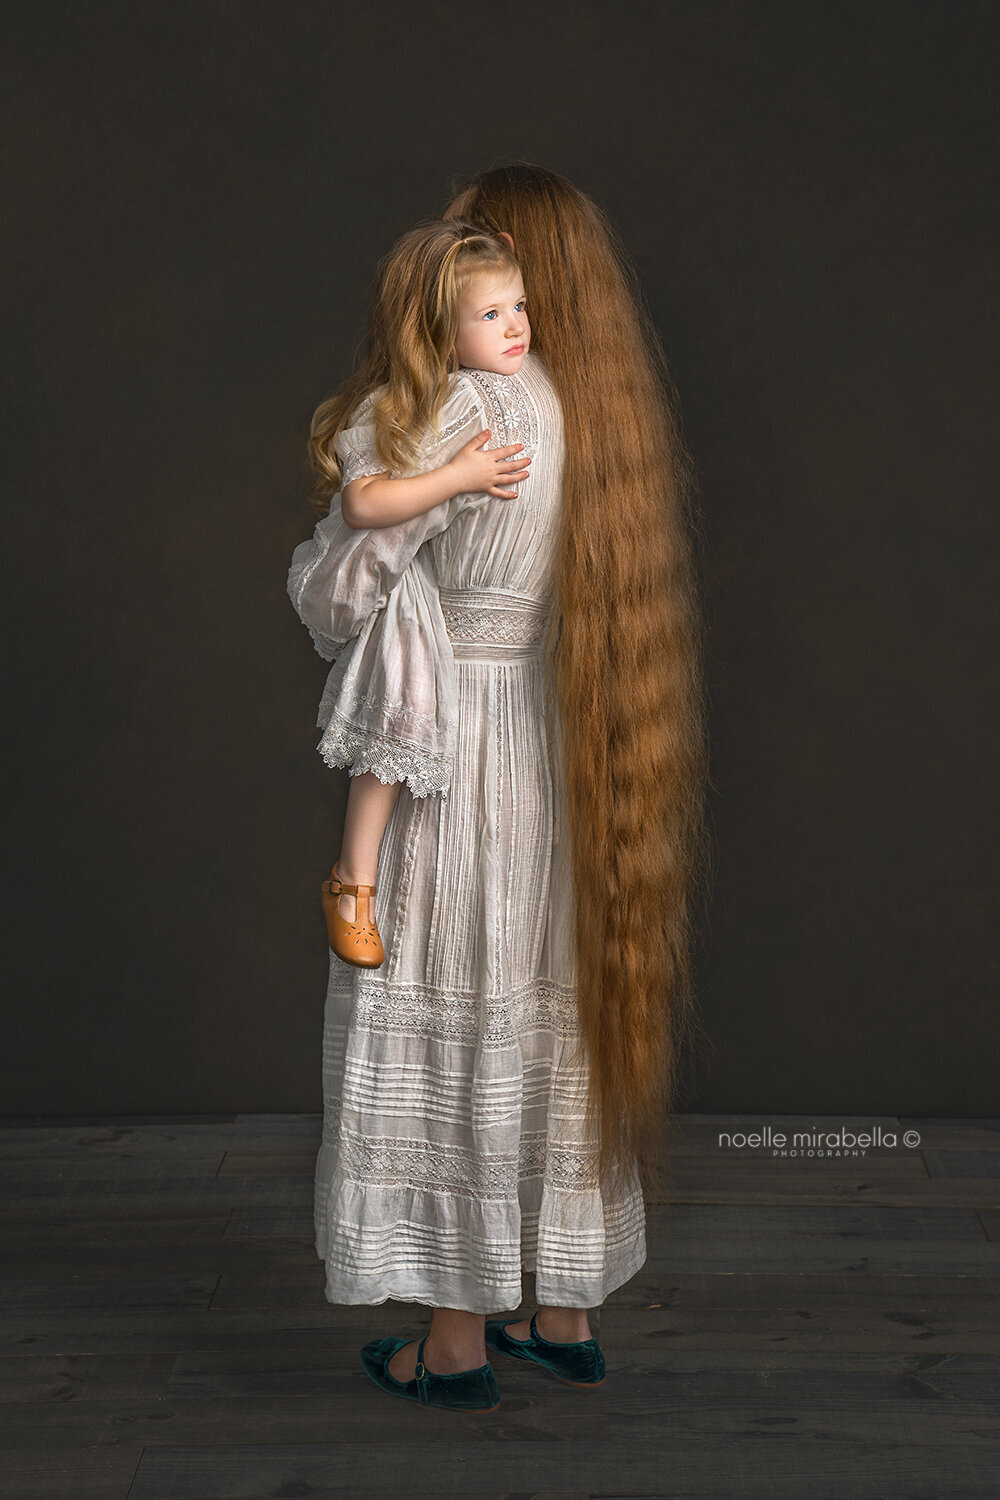 Mother with floor length long hair holding her daughter in her arms.